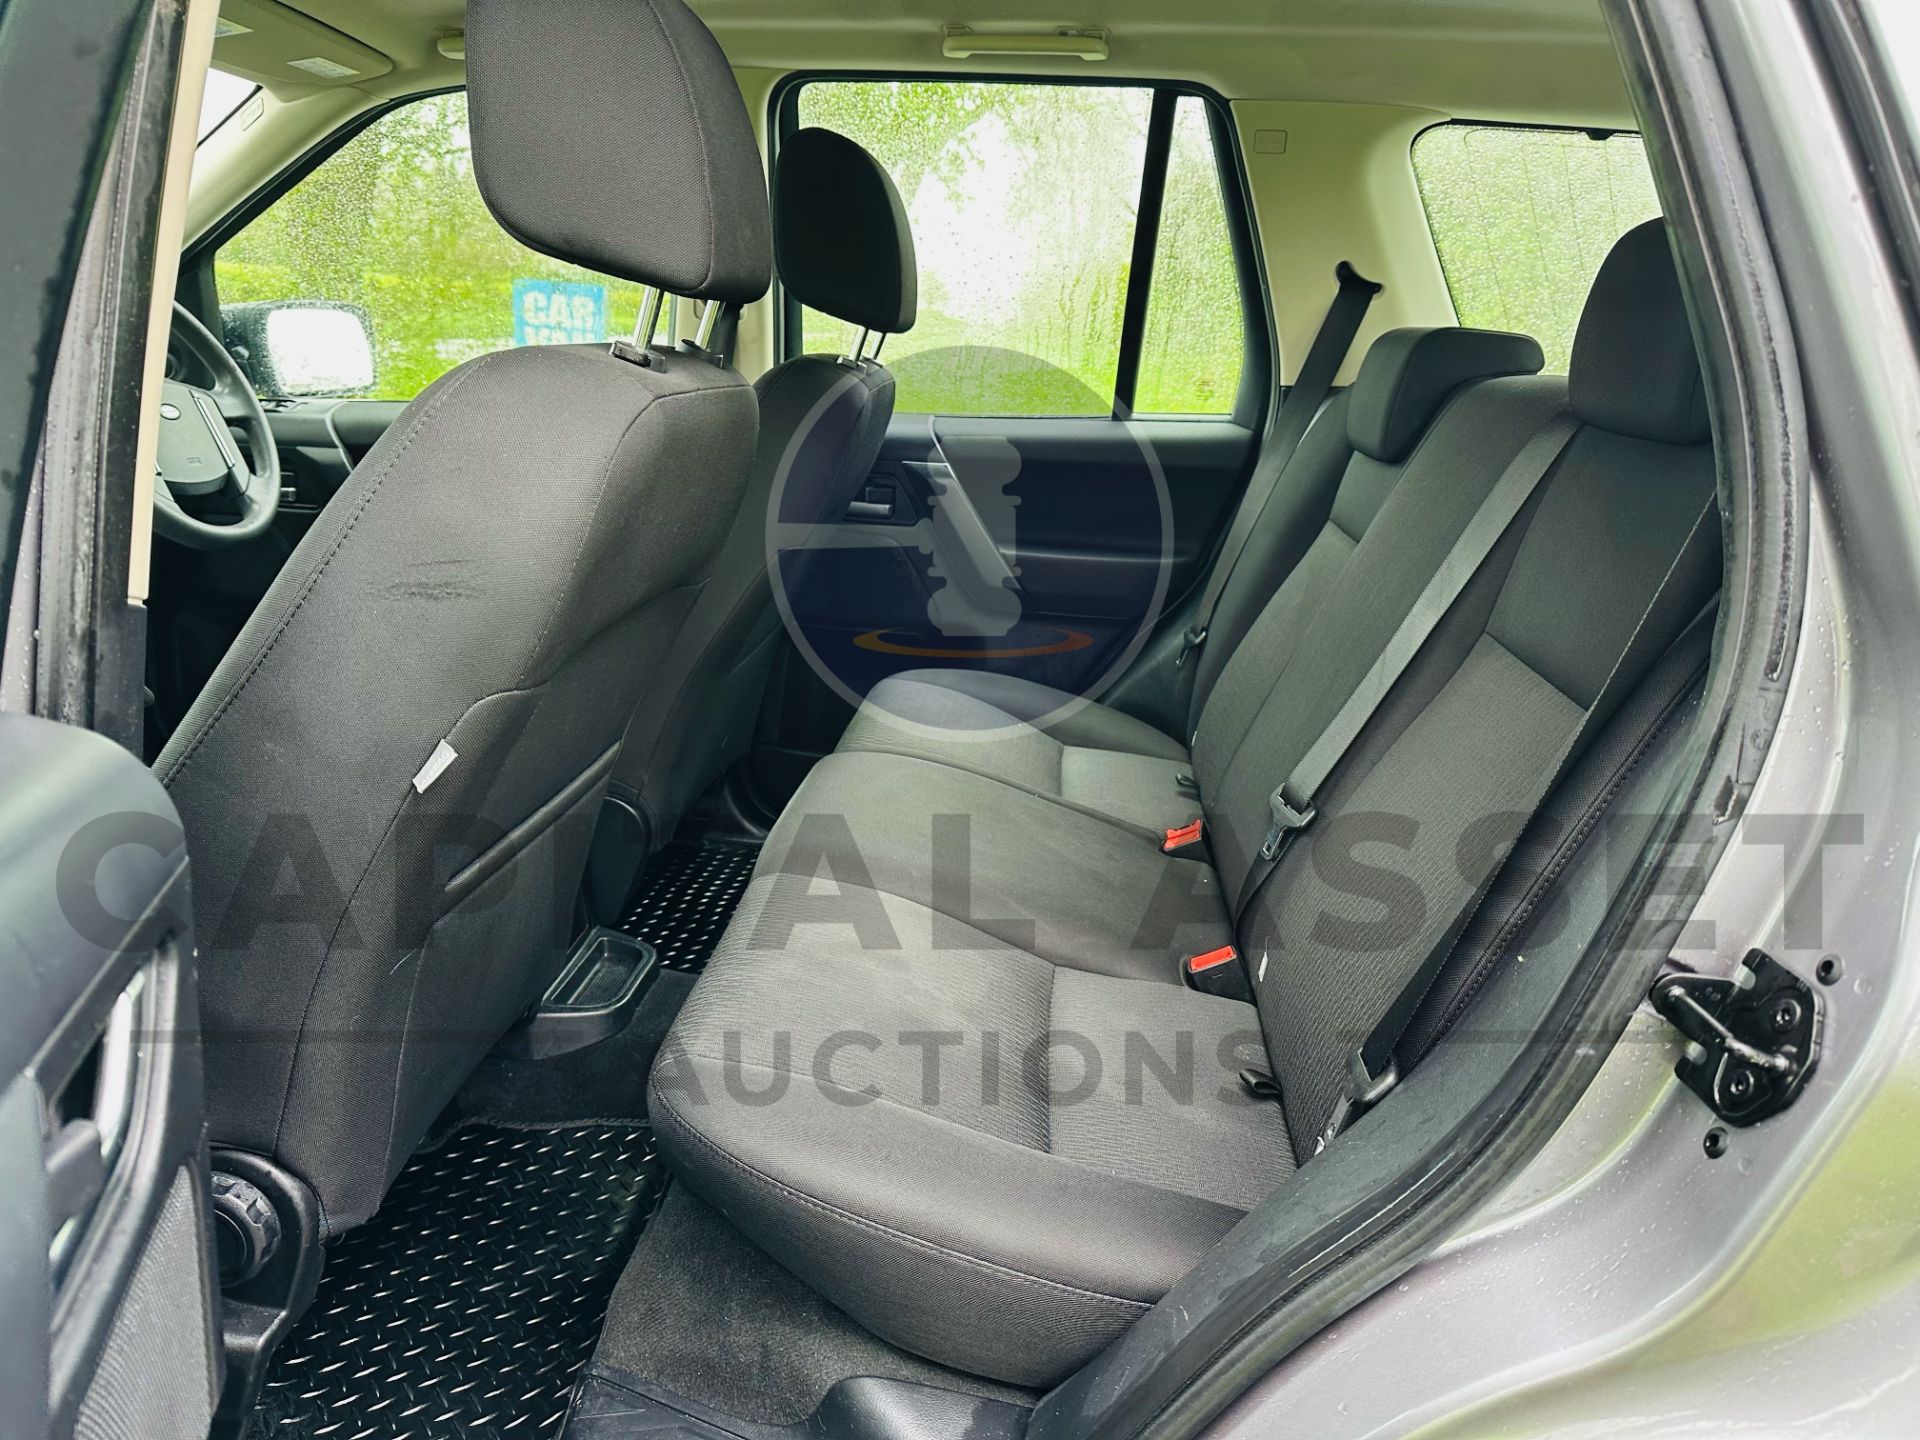 (ON SALE) LANDROVER FREELANDER 2.2TD4 S EDITION "AUTO - 2012 MODEL - AIR CON - FSH - Image 16 of 33